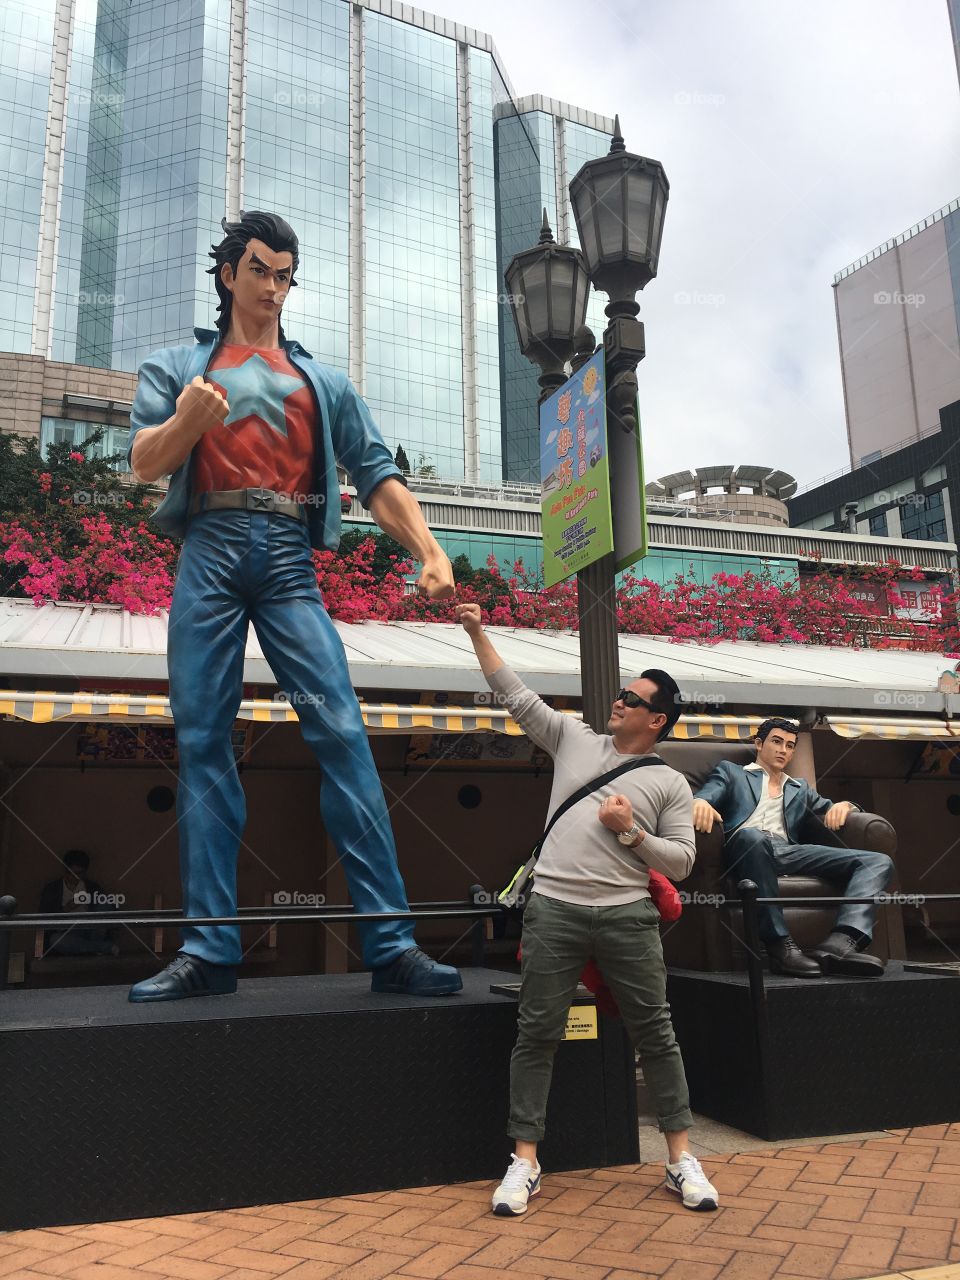 Fist fight with this giant statue! 